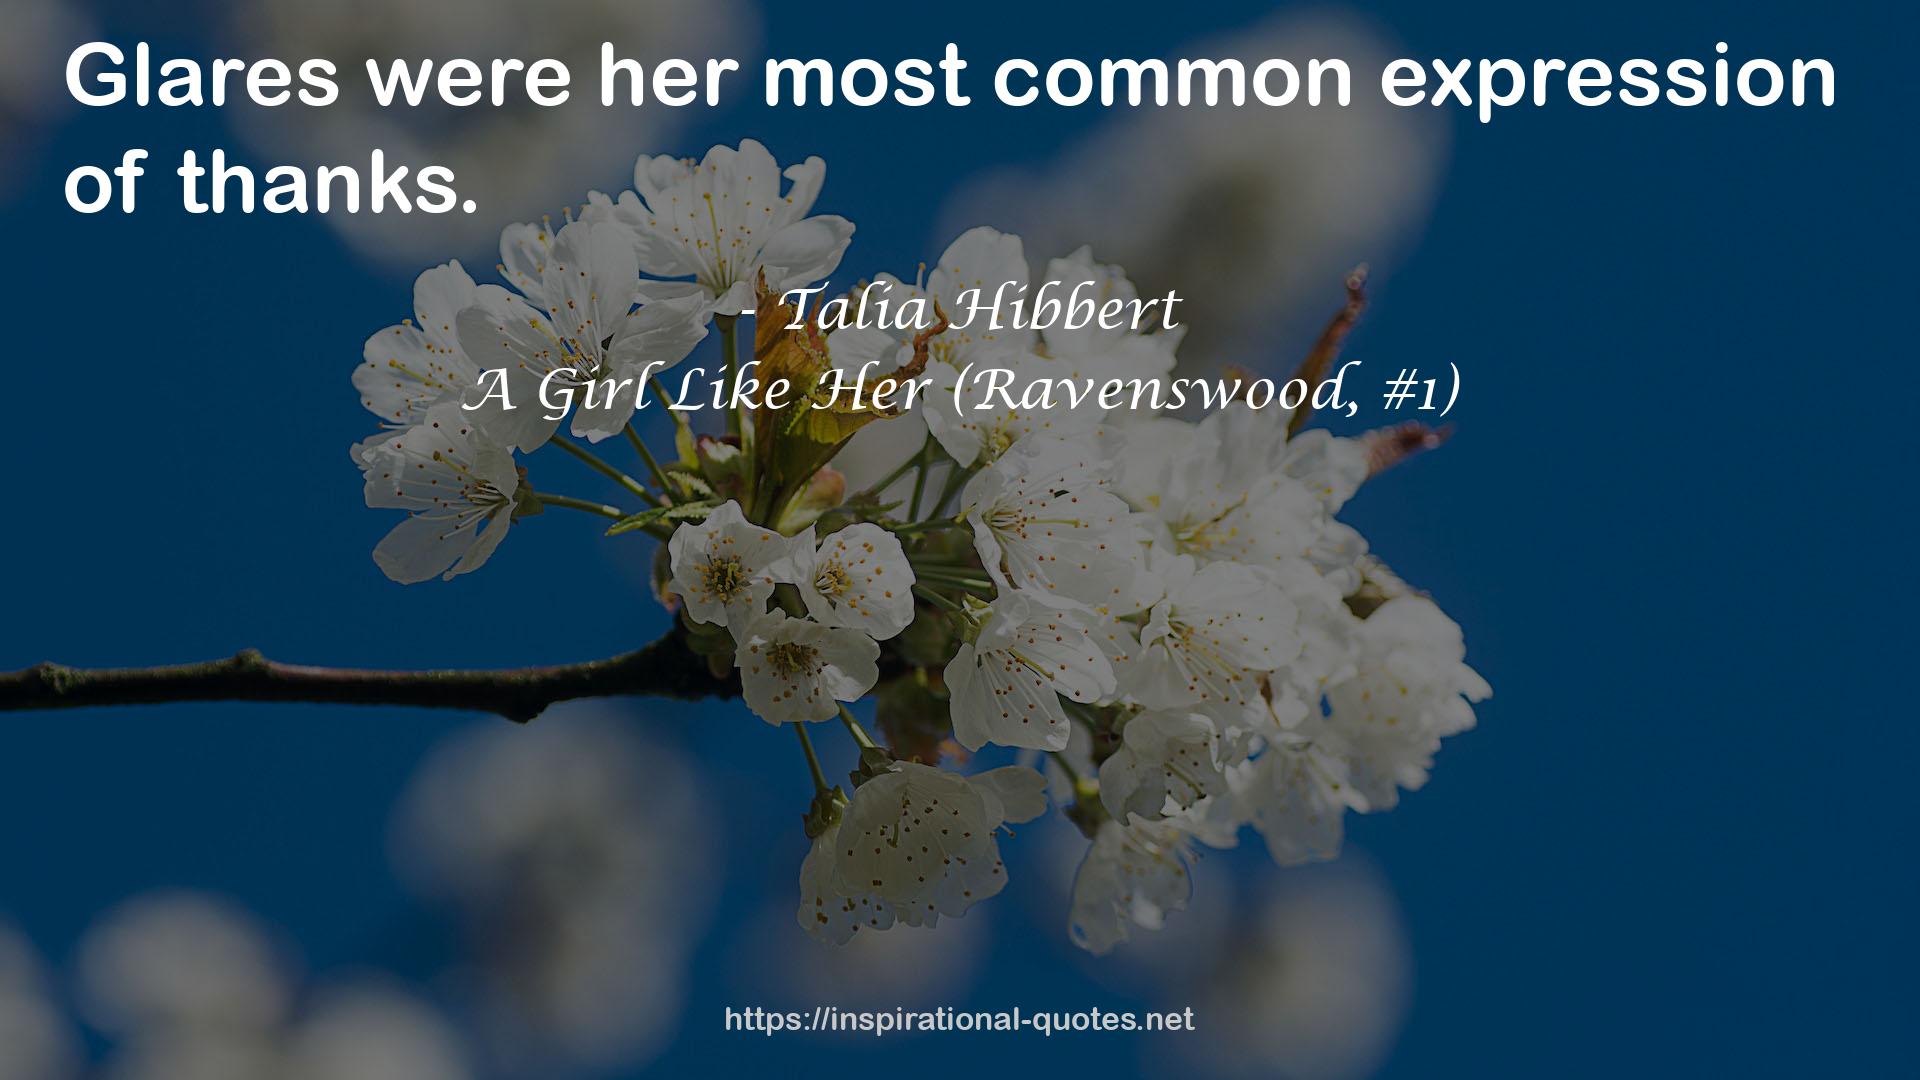 A Girl Like Her (Ravenswood, #1) QUOTES